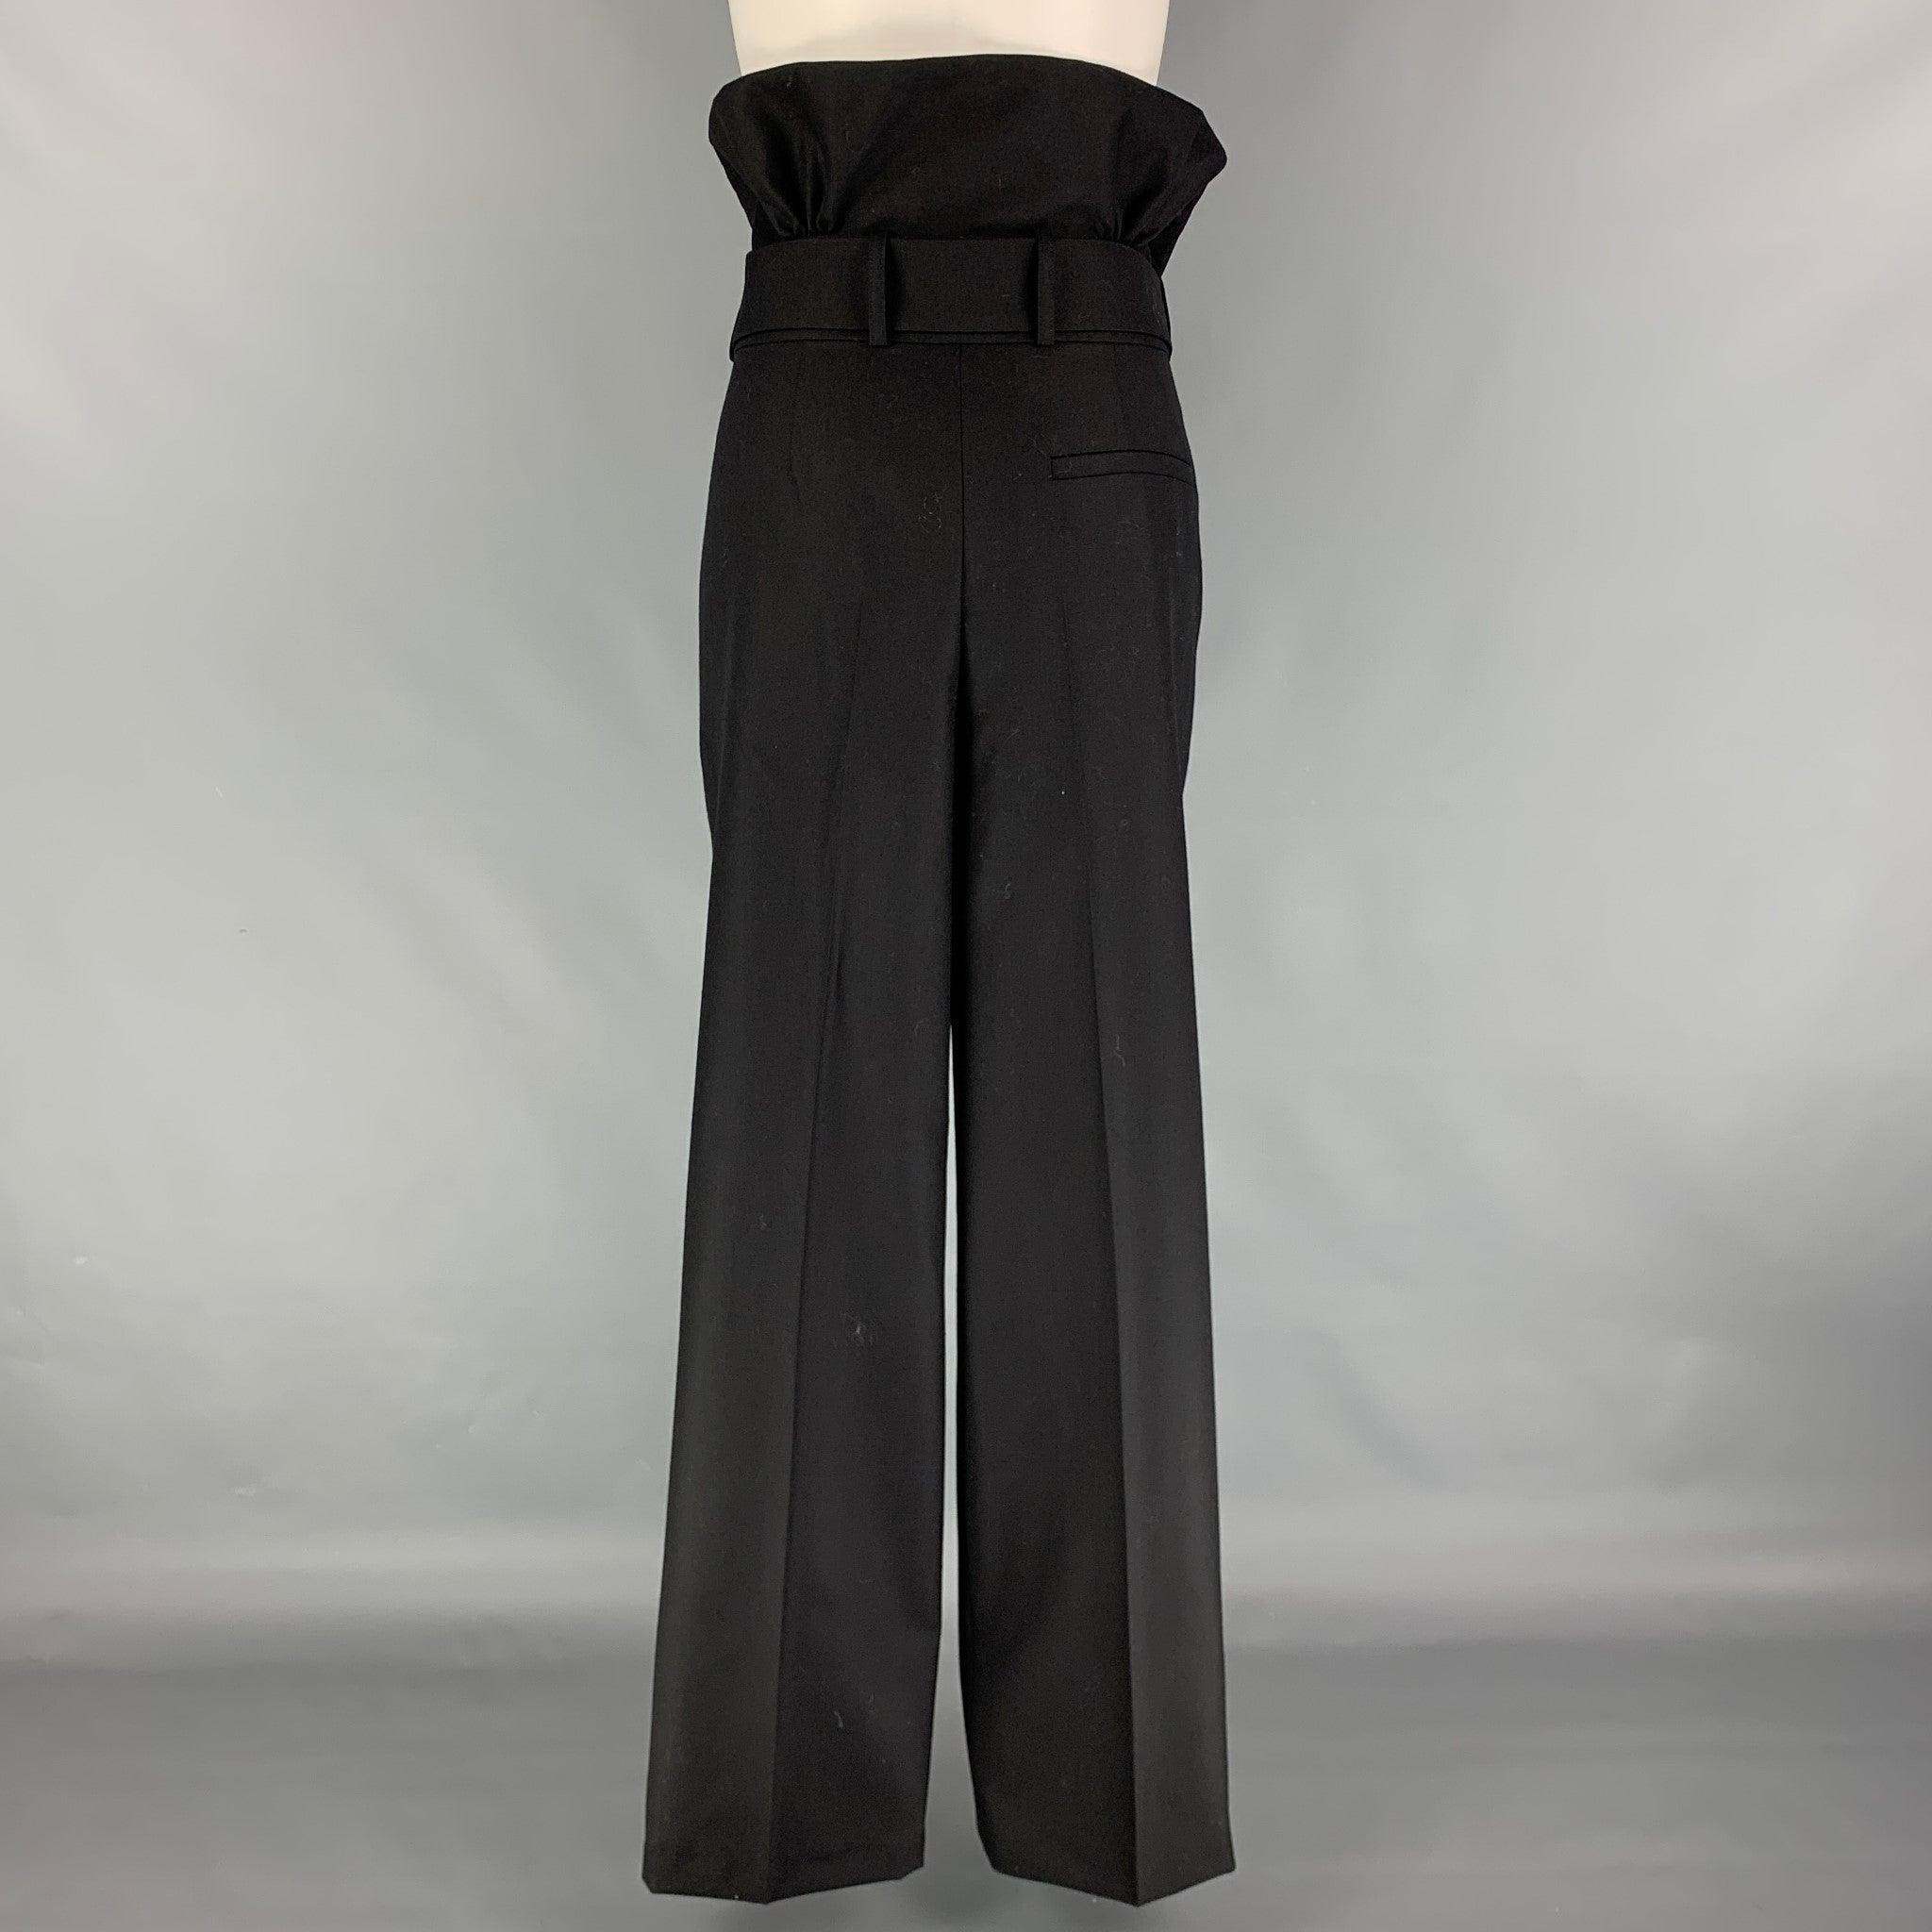 DRIES VAN NOTEN Size 8 Black Wool High Waisted Dress Pants In Good Condition For Sale In San Francisco, CA